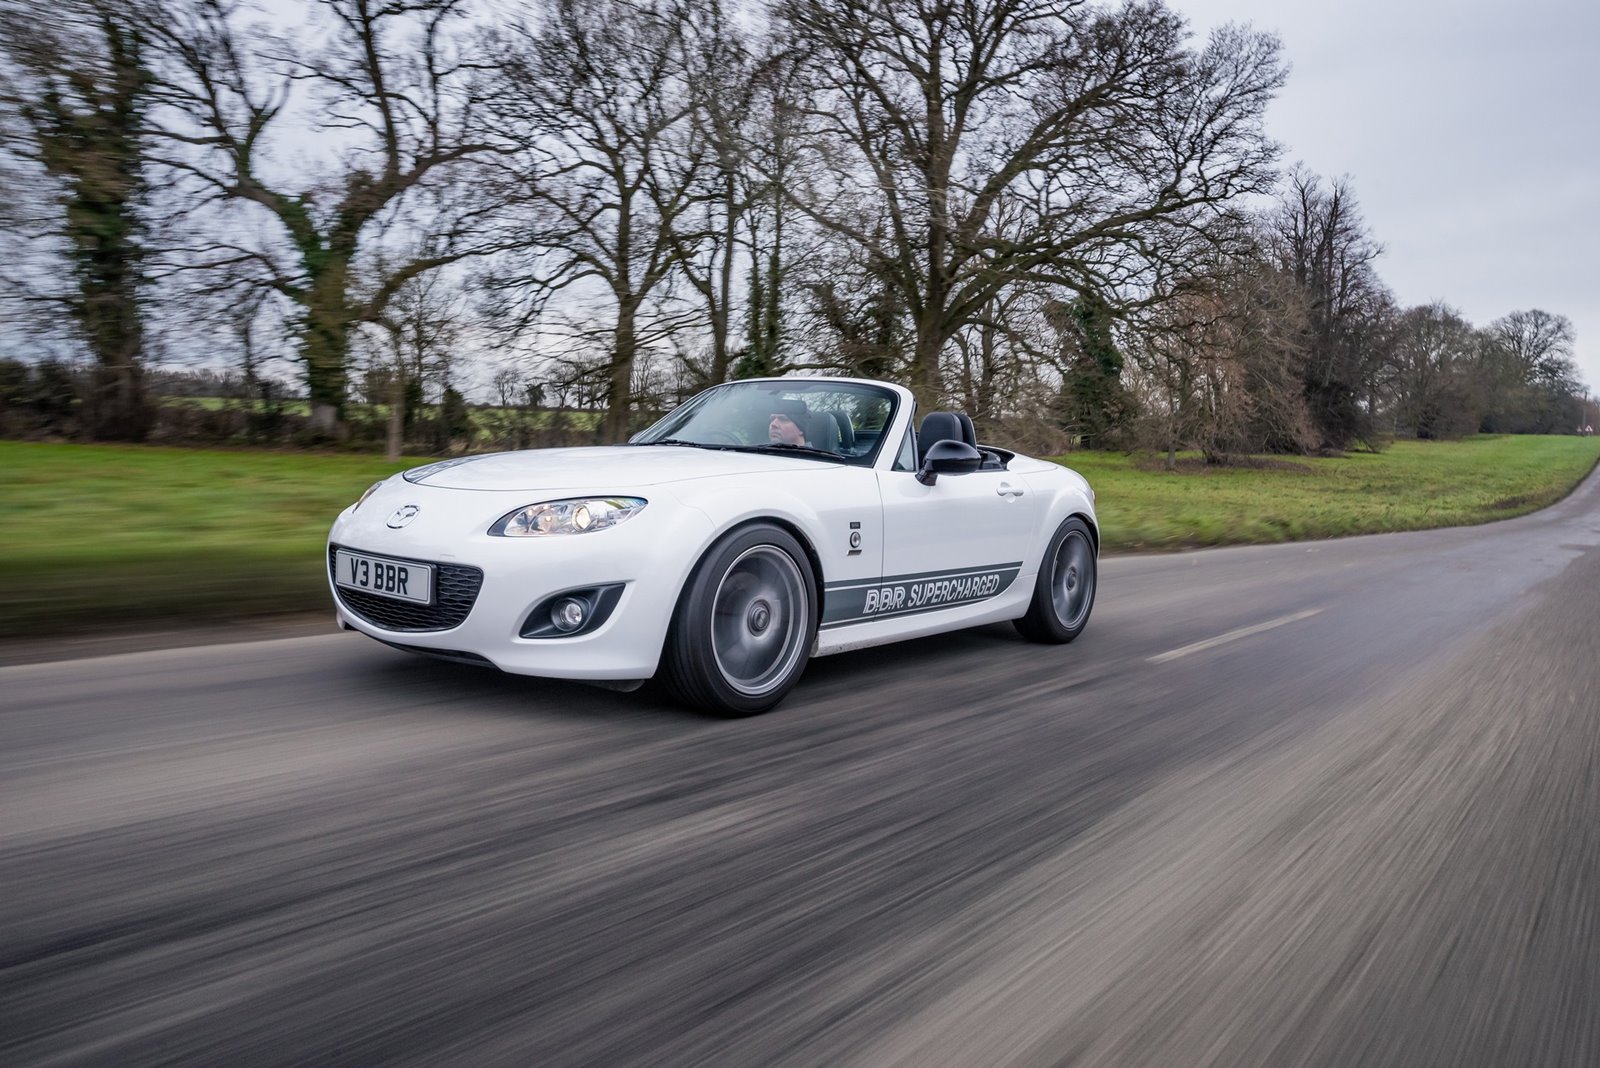 The Mazda MX-5 NC now with up to 300 hp of power